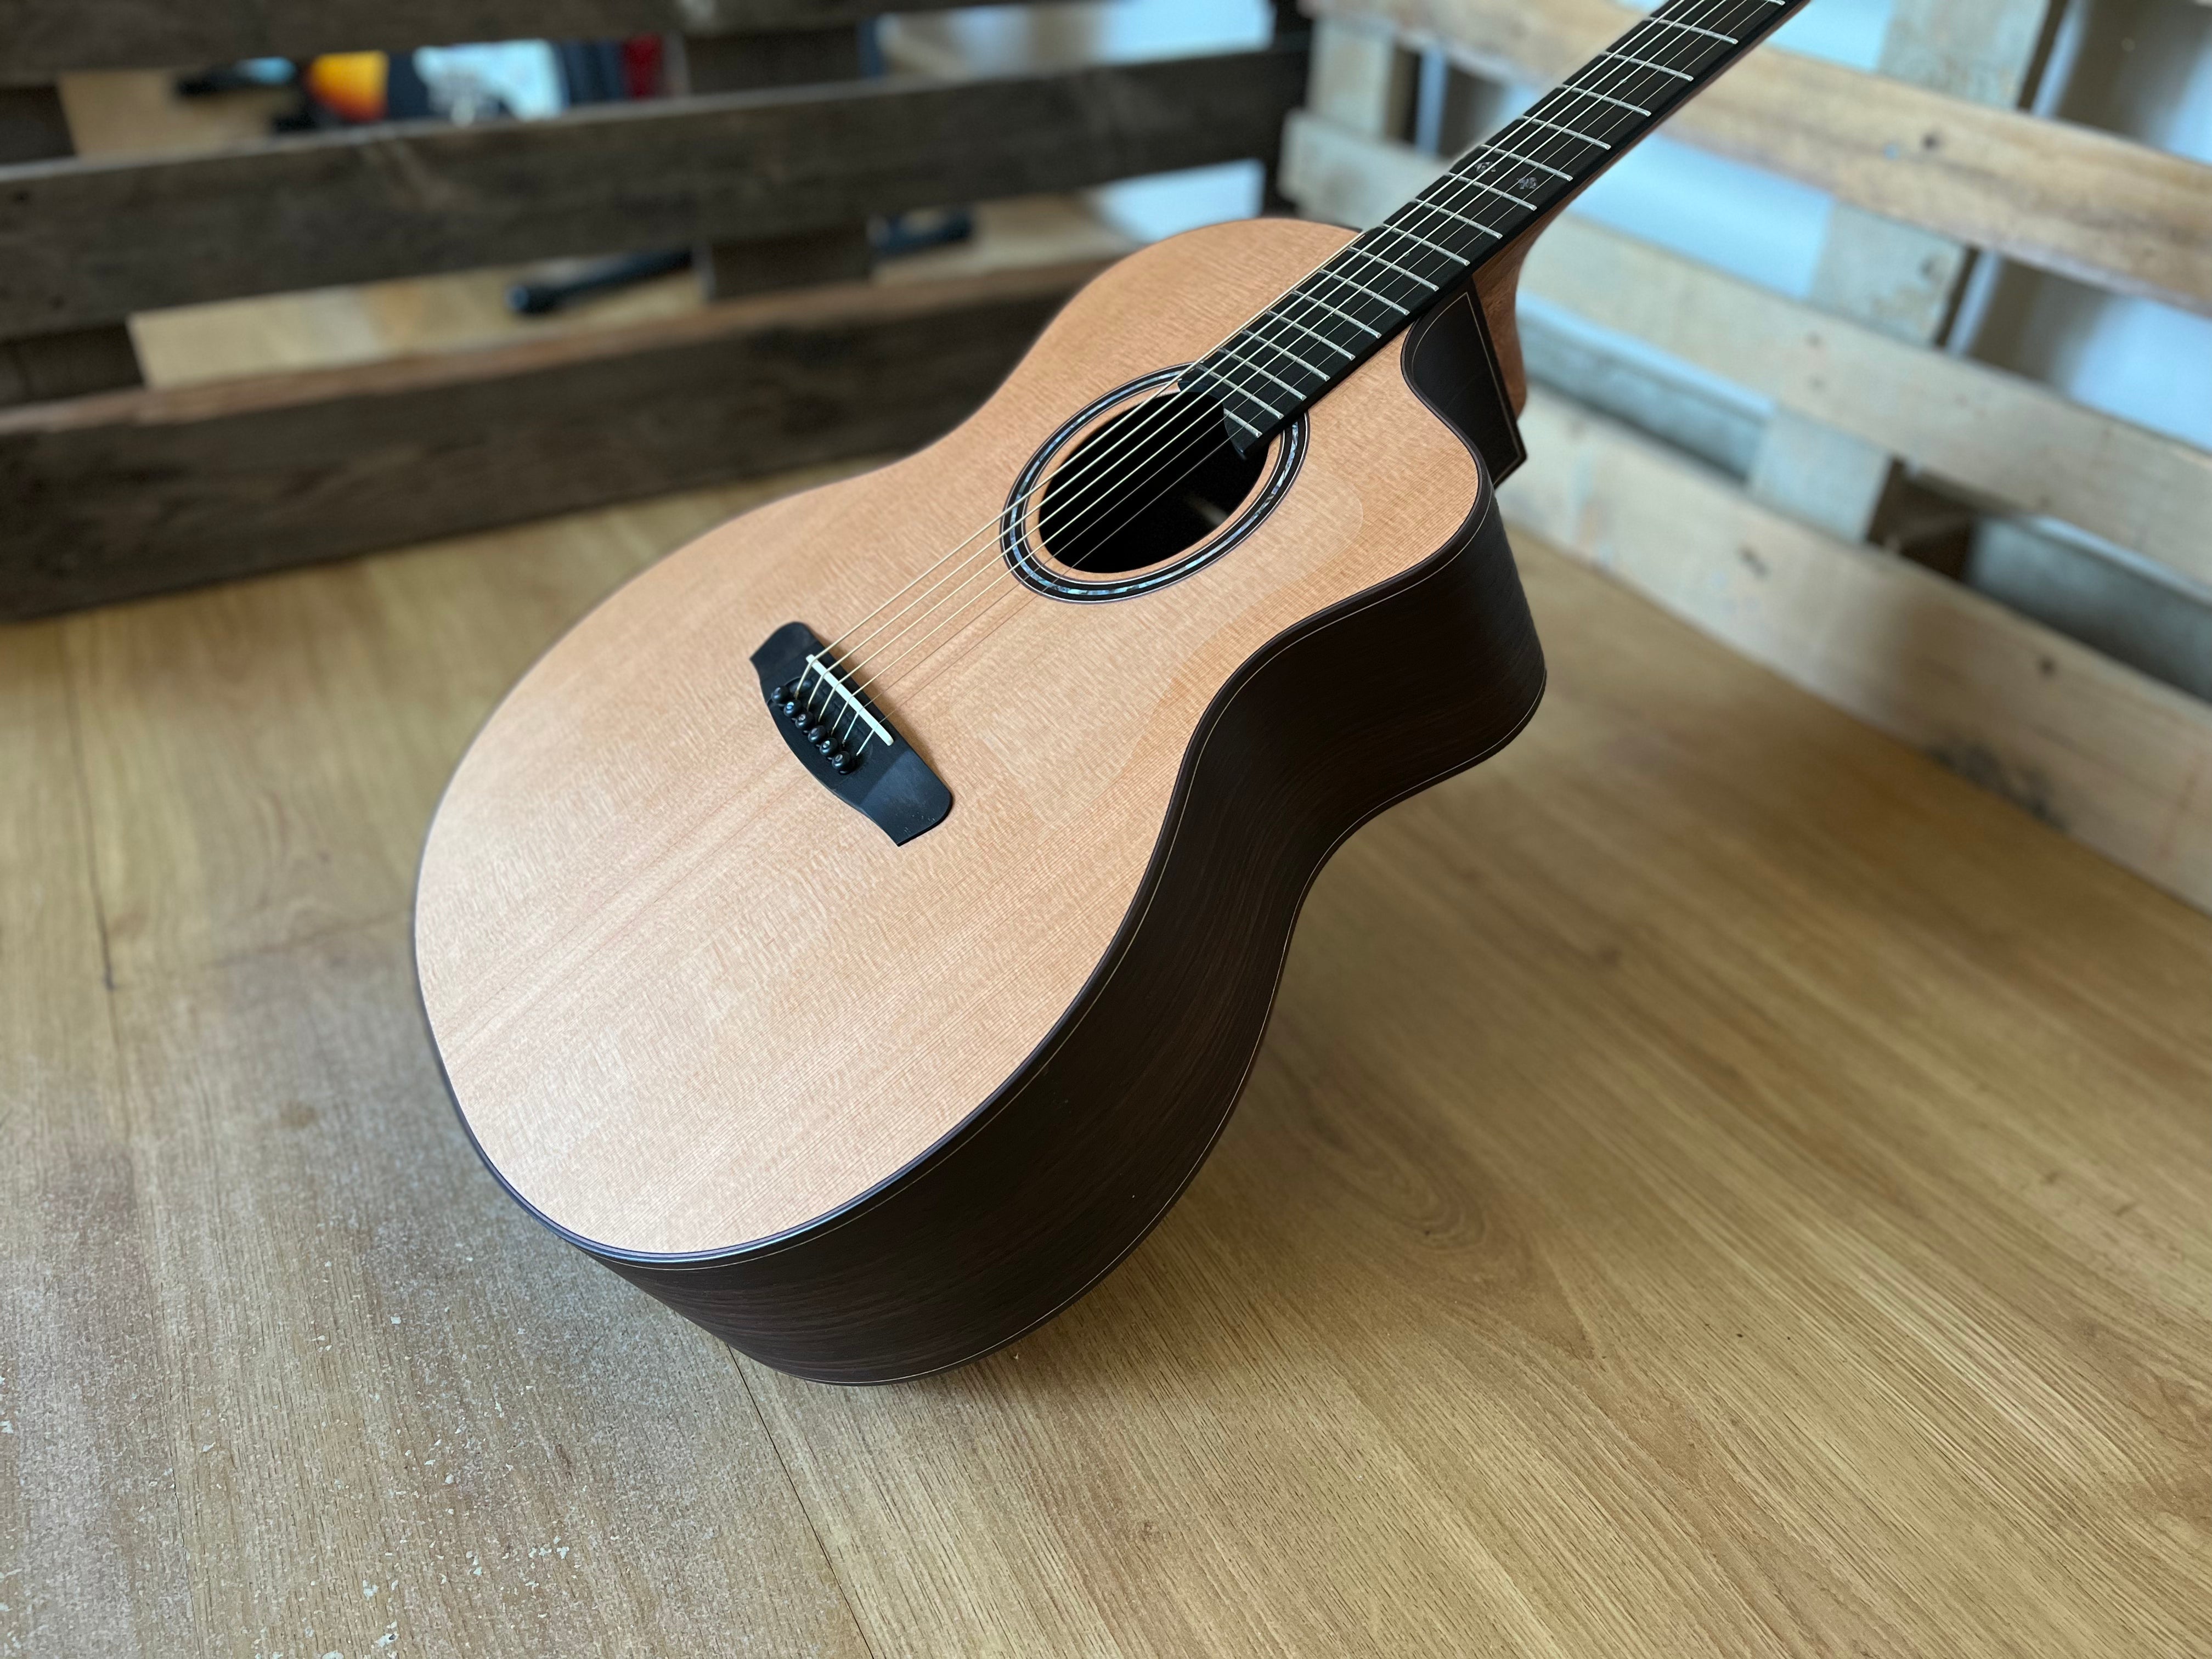 Dowina Rosewood GAC Swiss Moon Spruce, Acoustic Guitar for sale at Richards Guitars.